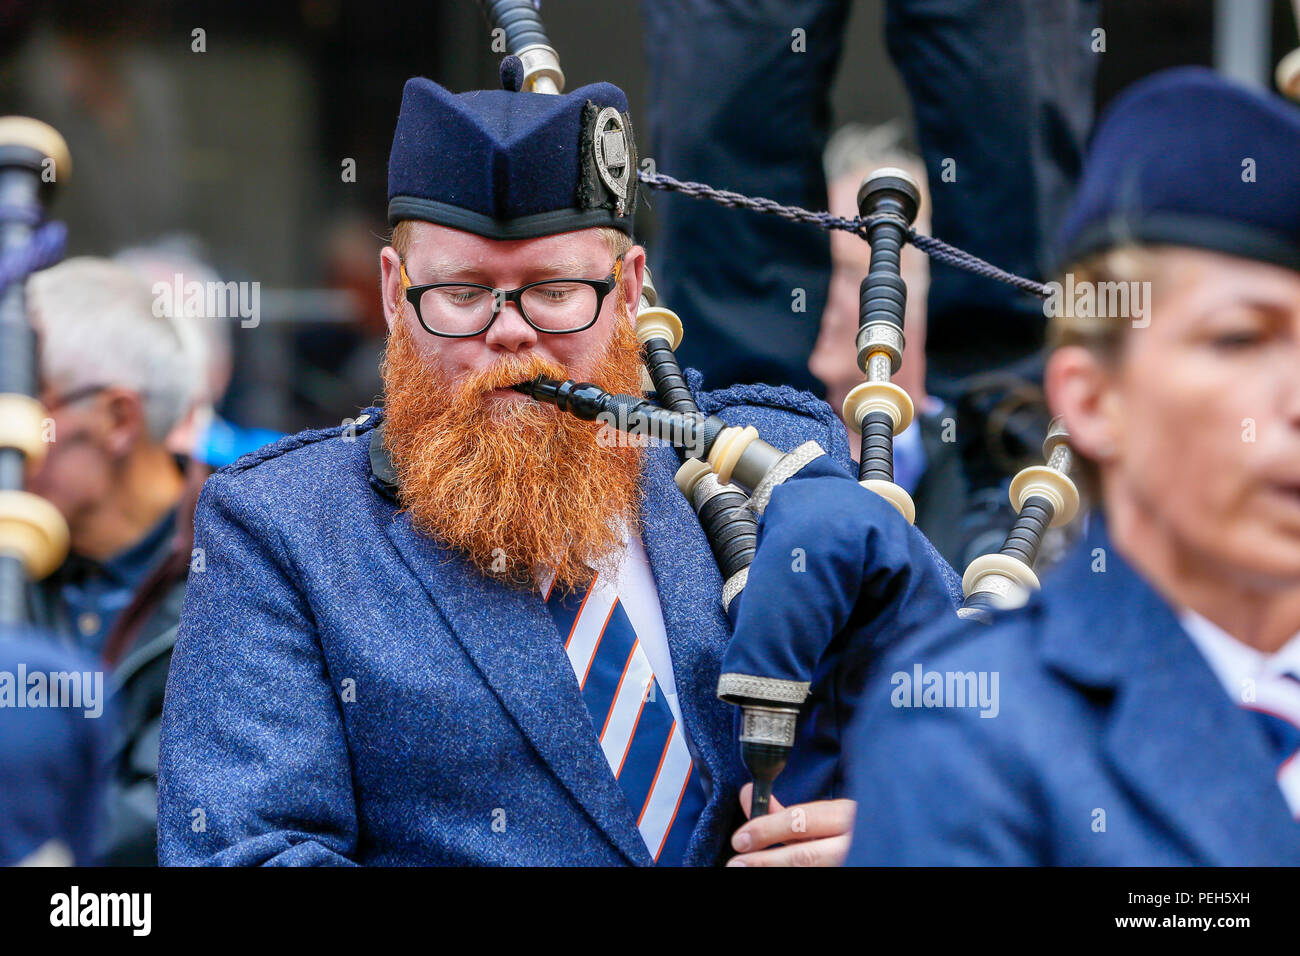 Glasgow, UK. 15th Aug 2018. Street performances continue in Buchanan Street, Glasgow with more international pipe bands playing near the Donald Dewar statue to entertain the public for free. The Pipe Band championships conclude on Saturday 18th August at Glasgow Green. Picture of DAVID WELSH, originally from Aberdeen, now living in Wellington New Zealand and playing with the Simon Fraser University pipe band from British Columbia, Canada Credit: Findlay/Alamy Live News Stock Photo